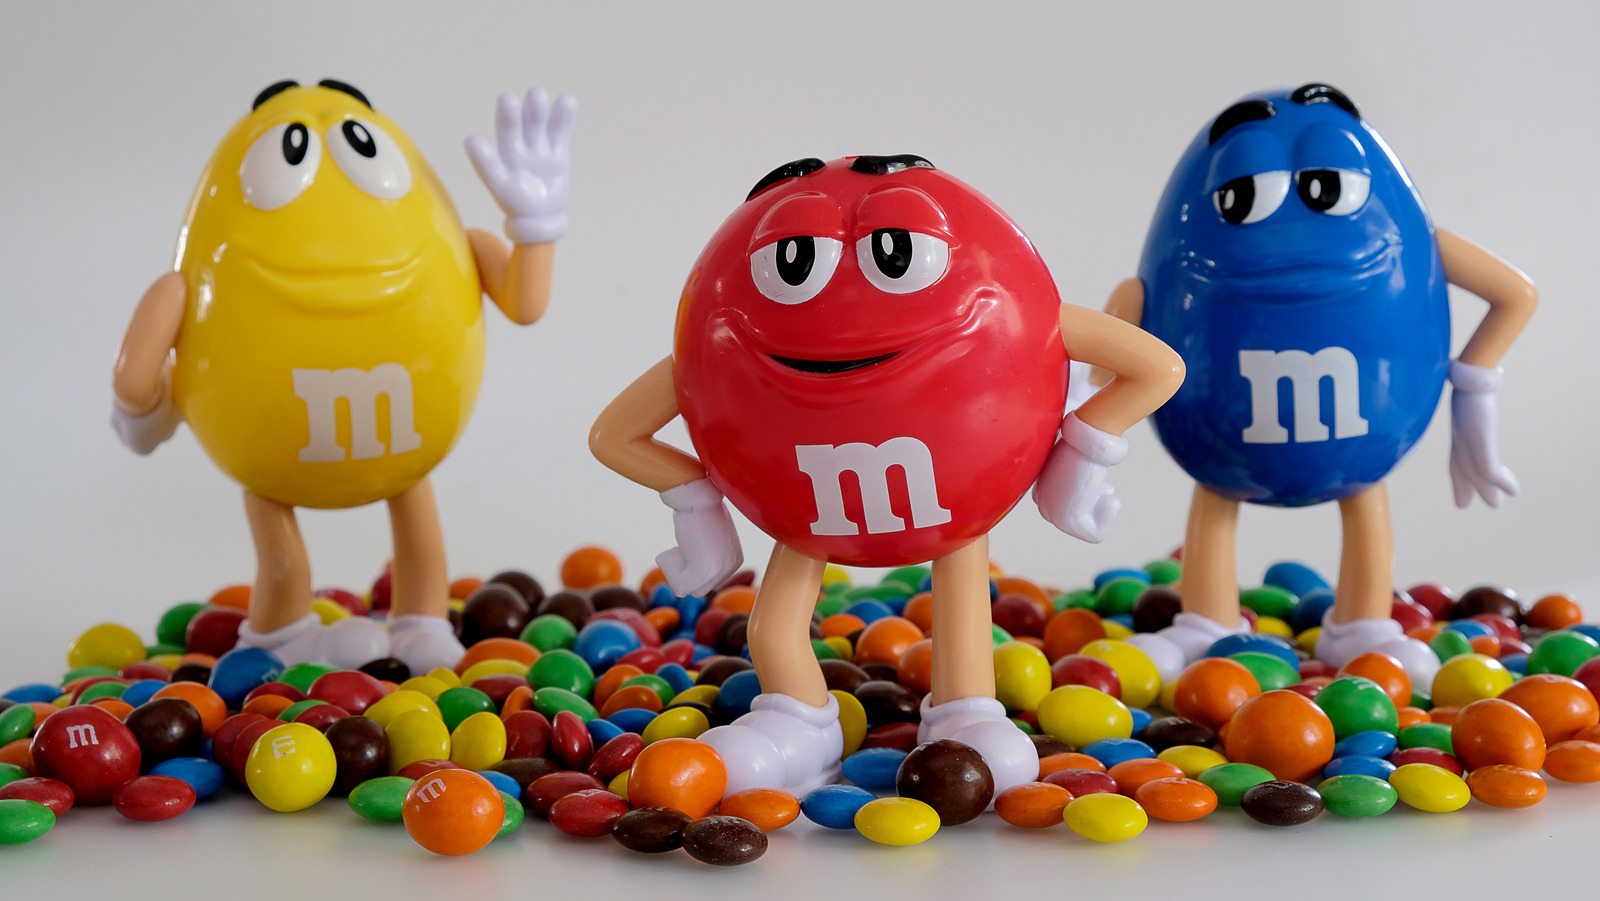 M&M's Just Revealed A New Character